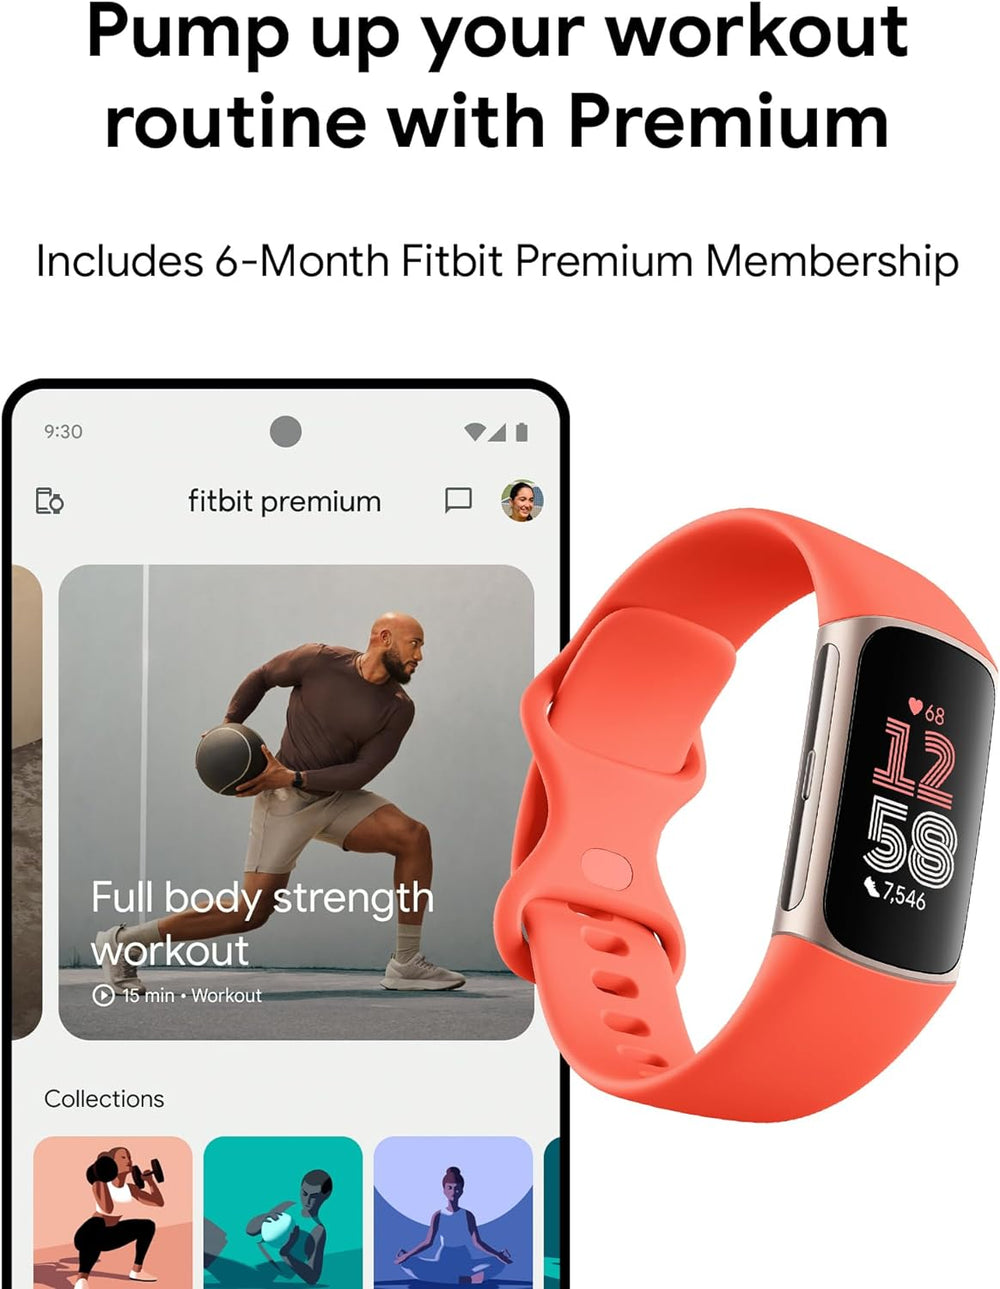 Fitbit Luxe Health & Fitness Tracker with 6-Month Fitbit Premium